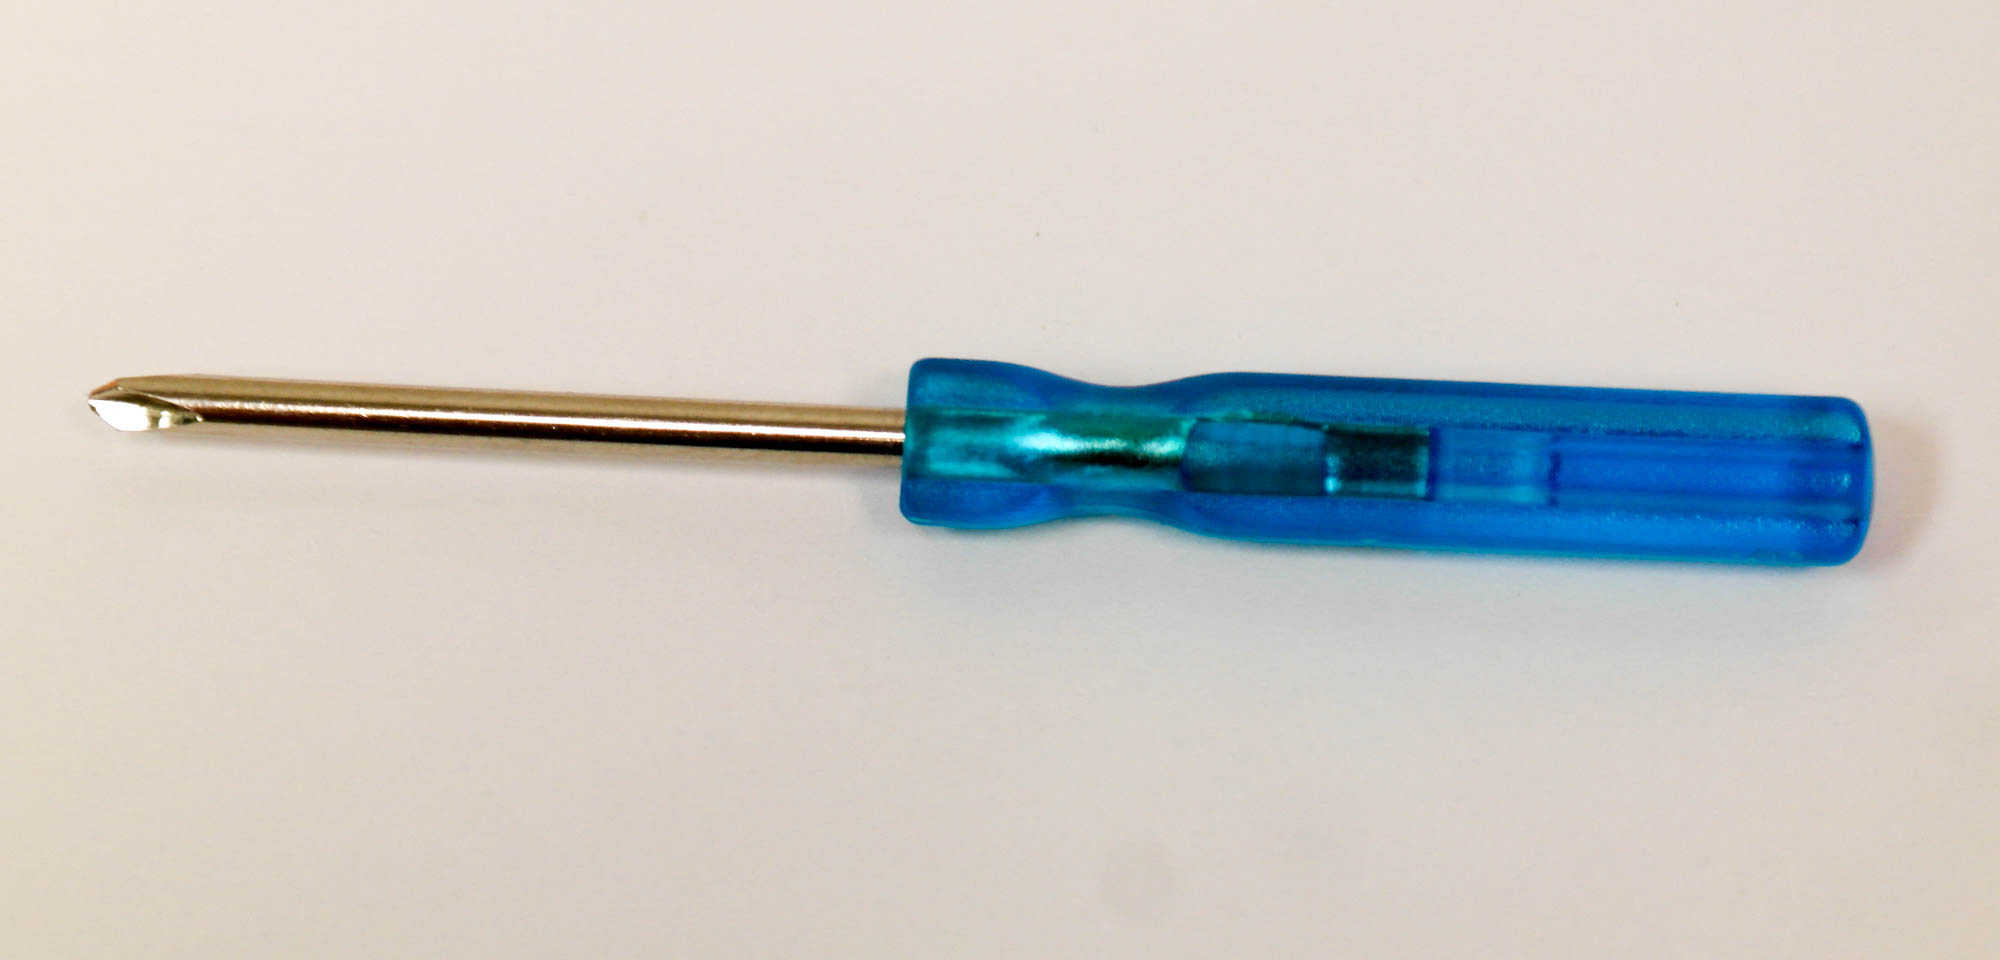 Triwing Screwdriver for Nintendo Original DS, DS Lite, and GBA Gameboy Advance by Mars Devices